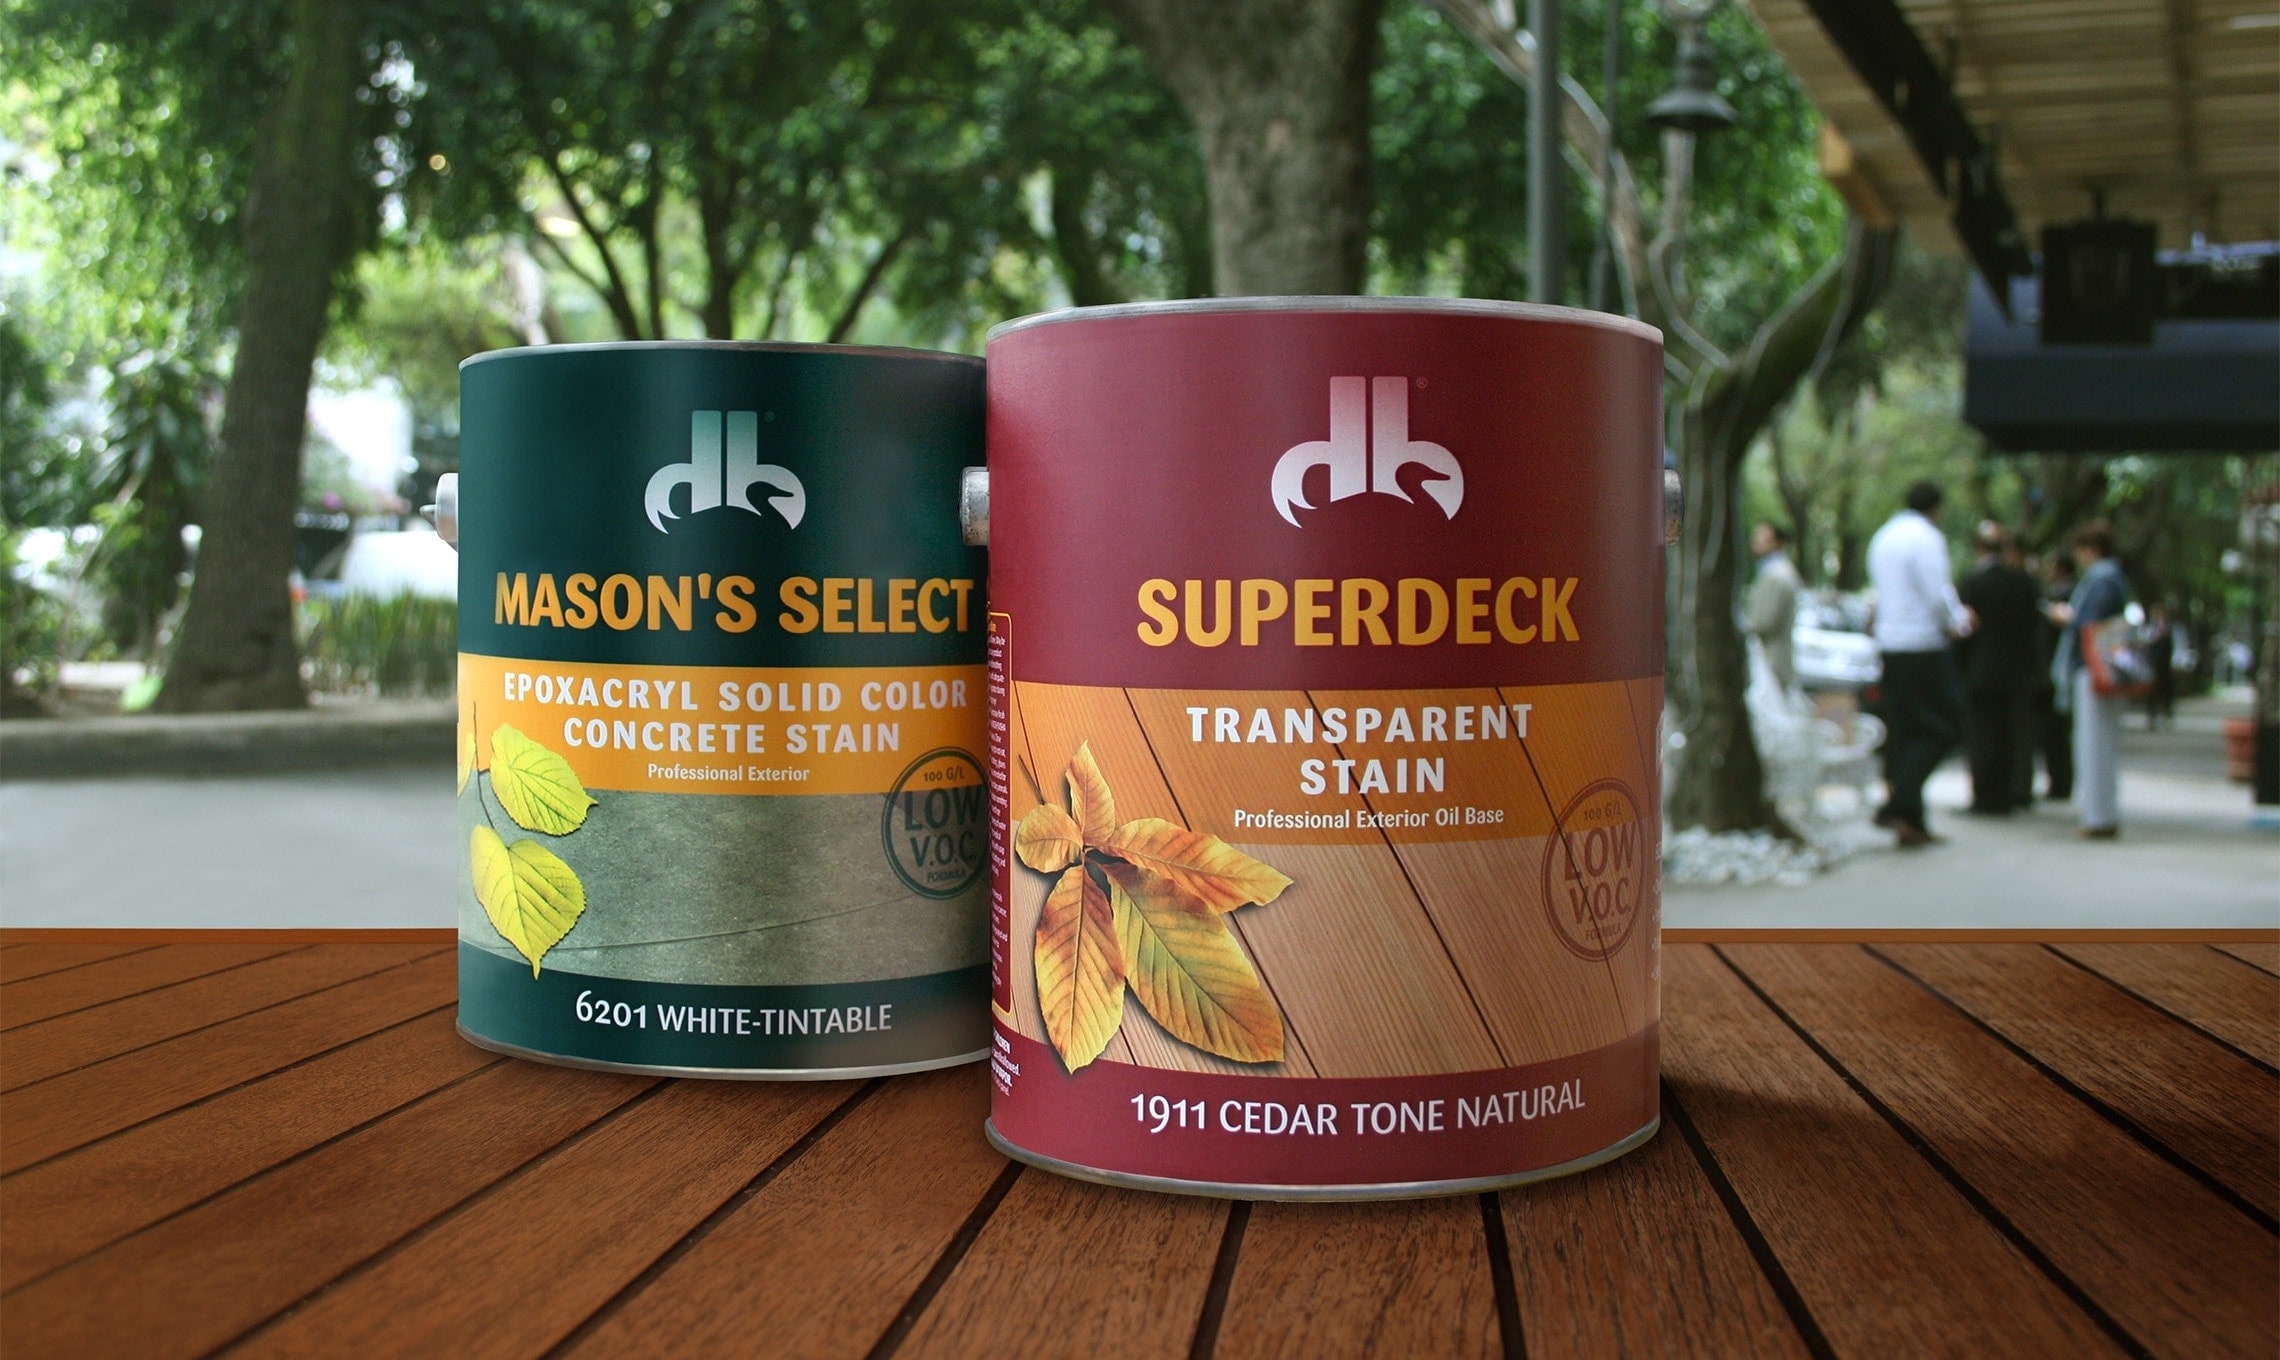 Two cans of superdeck and Mason's Select sitting on a wooden table.